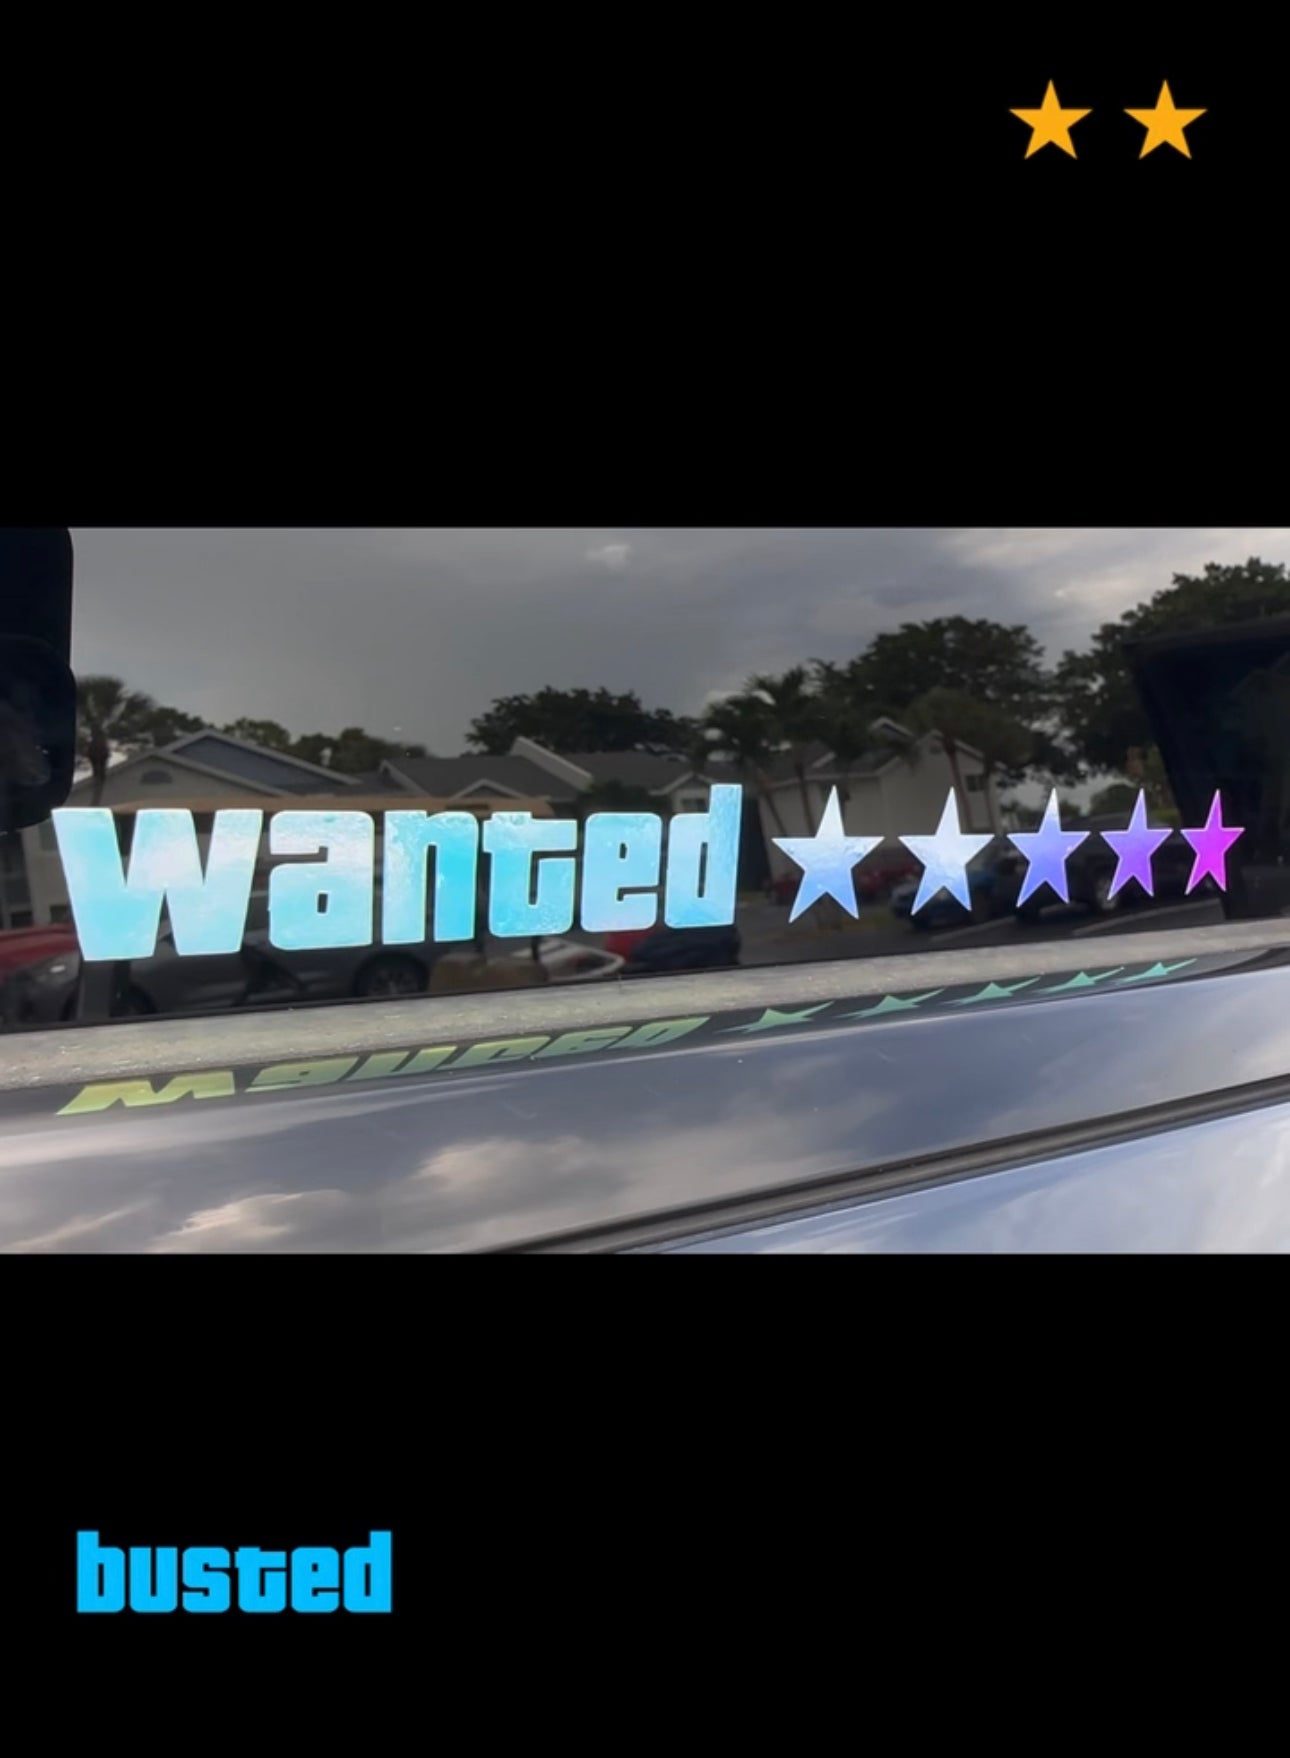 Wanted ★★★★★